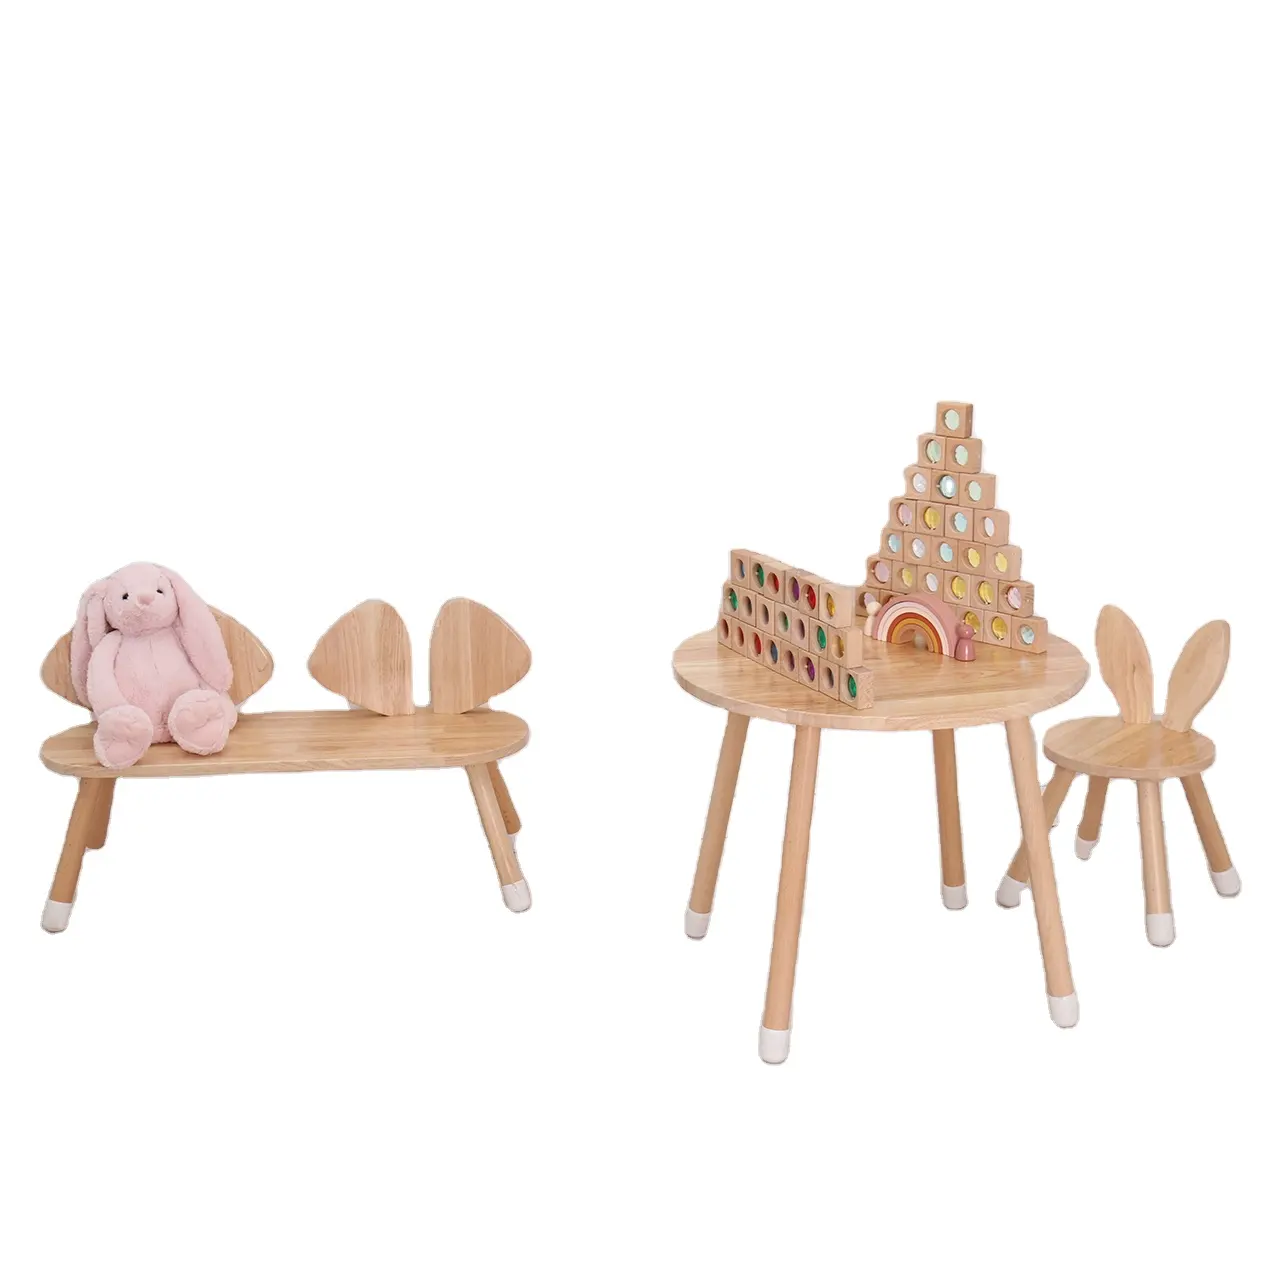 Factory Nordic Kids Play Room Furniture Study Table Rubber Wood Toddler Table and Chairs Set for Kids Room Decoration Carton Box